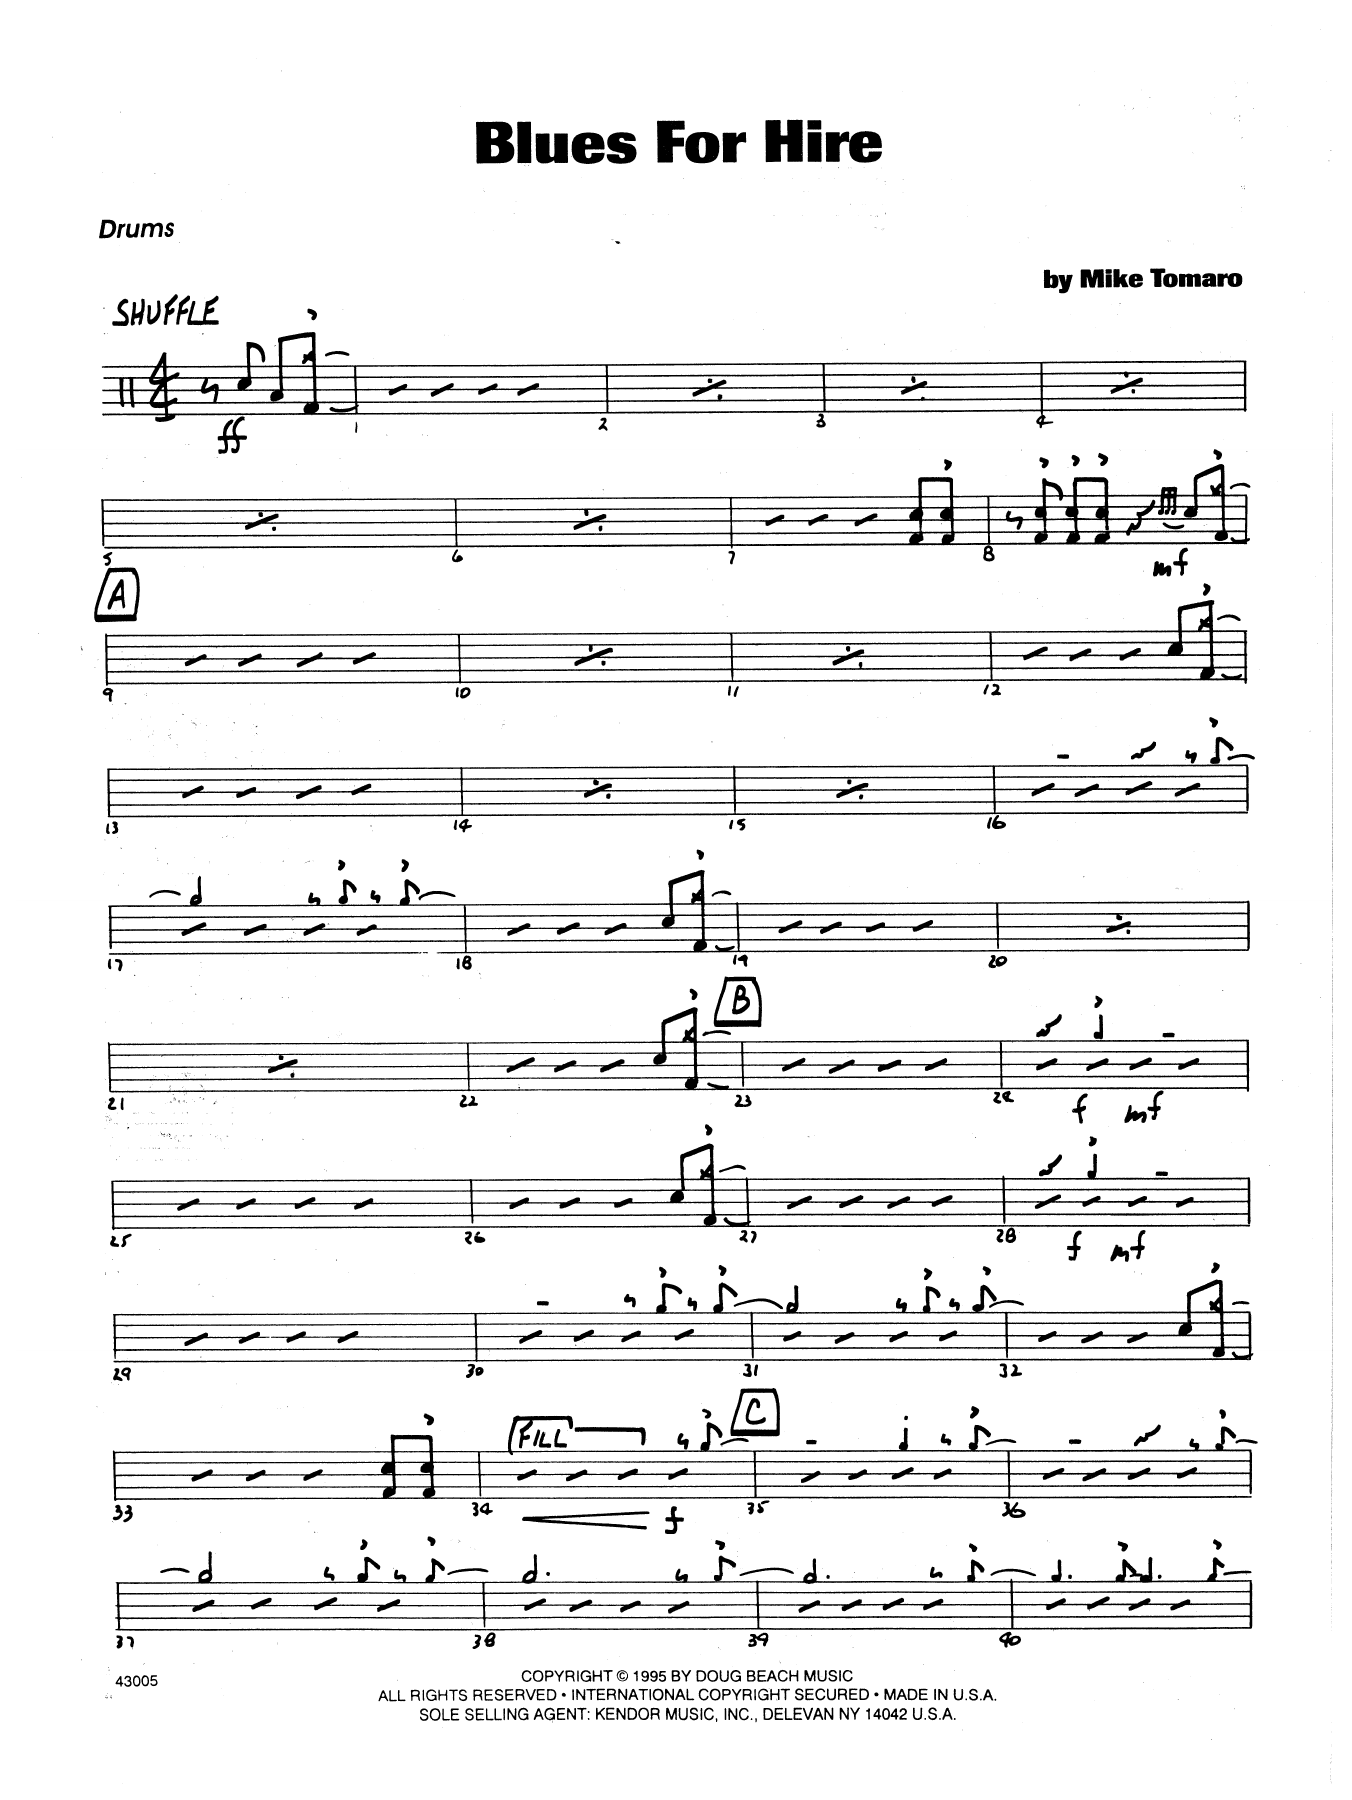 Download Mike Tomaro Blues For Hire - Drum Set Sheet Music